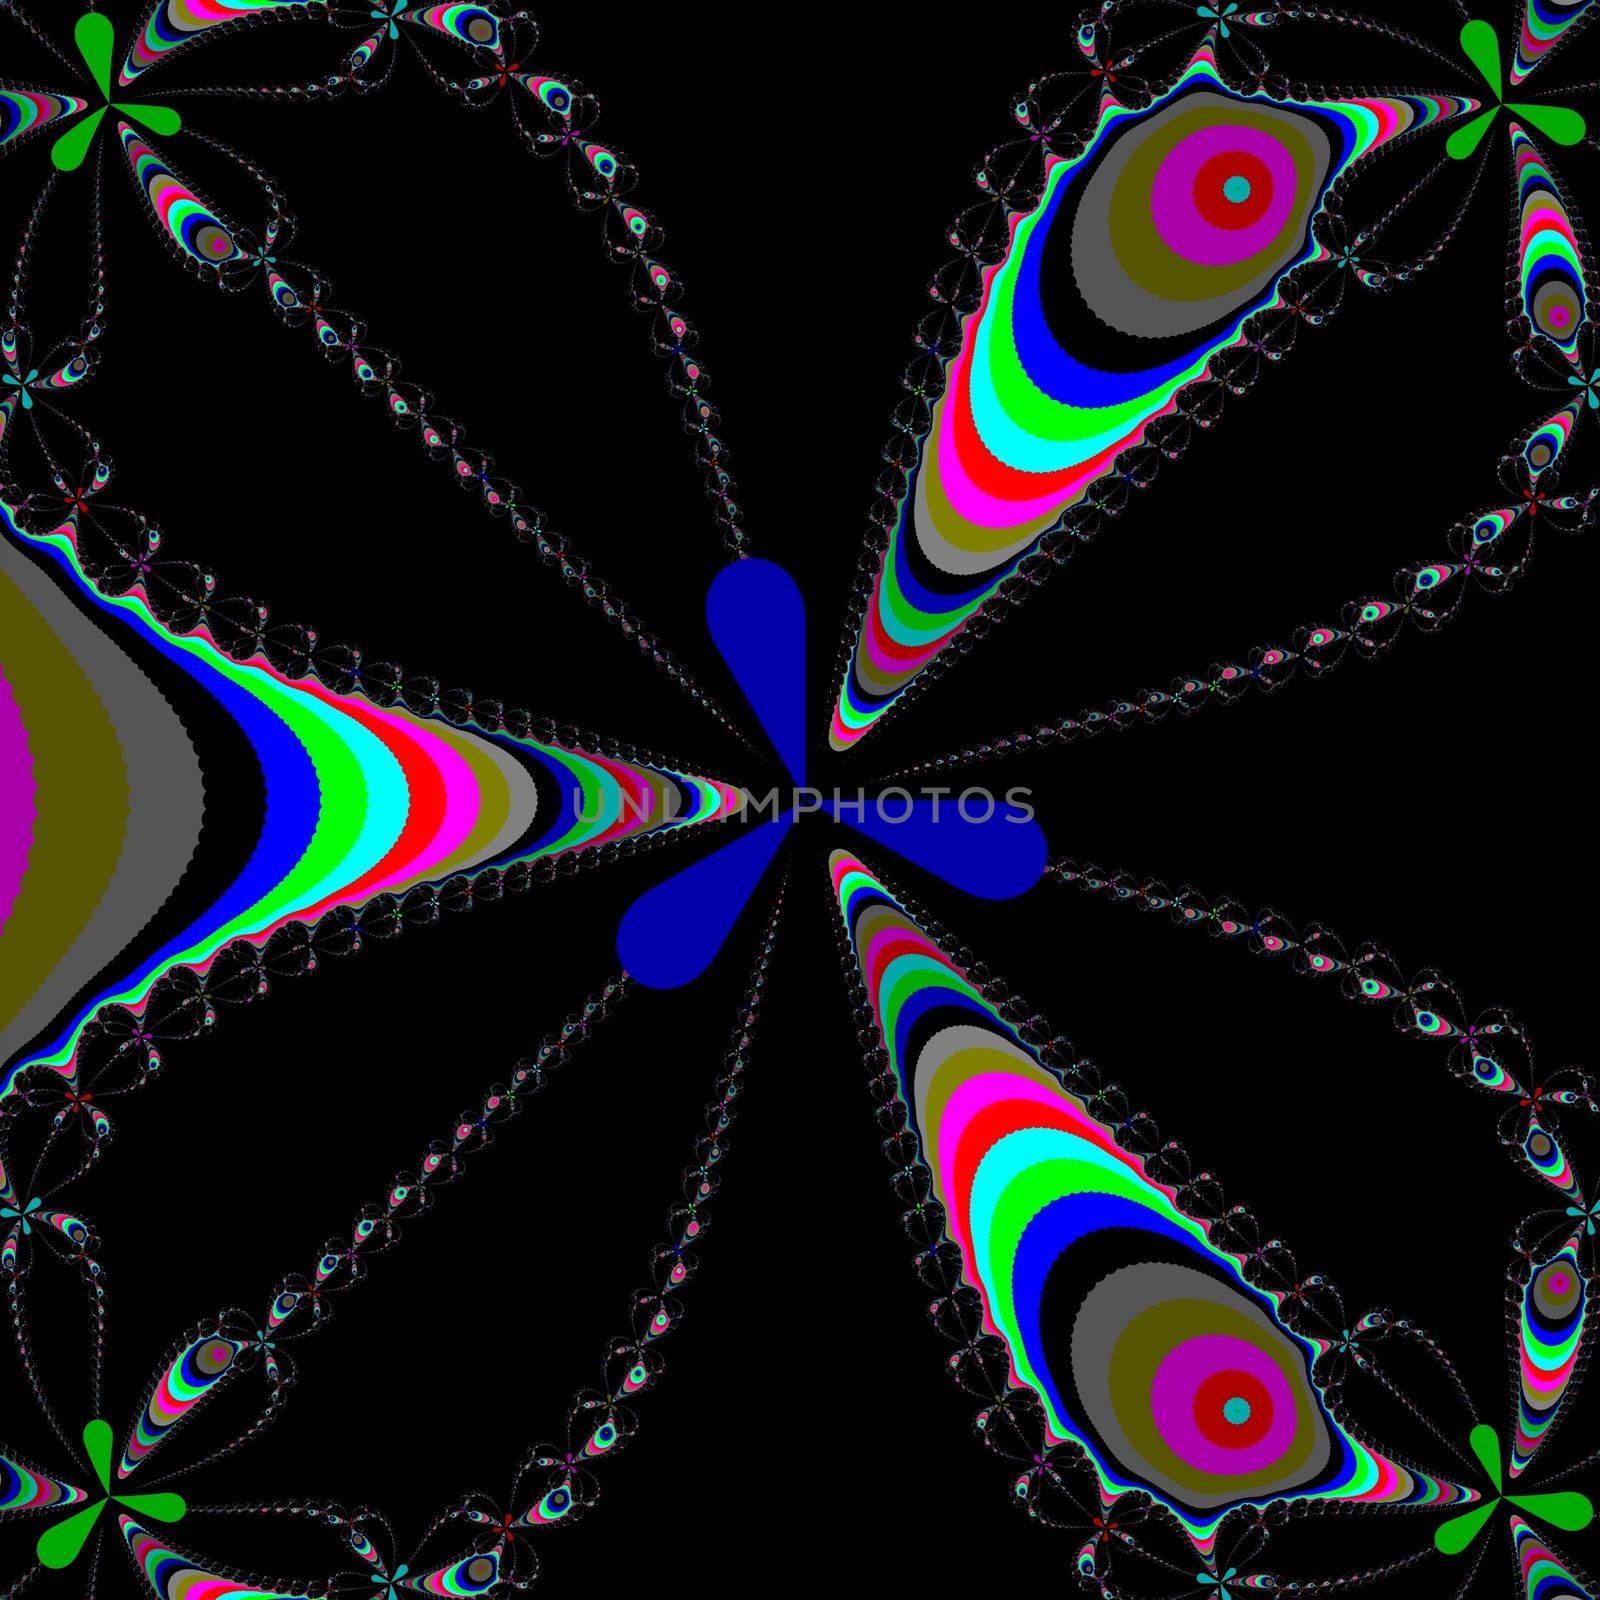 Colour Newton set abstract fractal illustration useful as a background